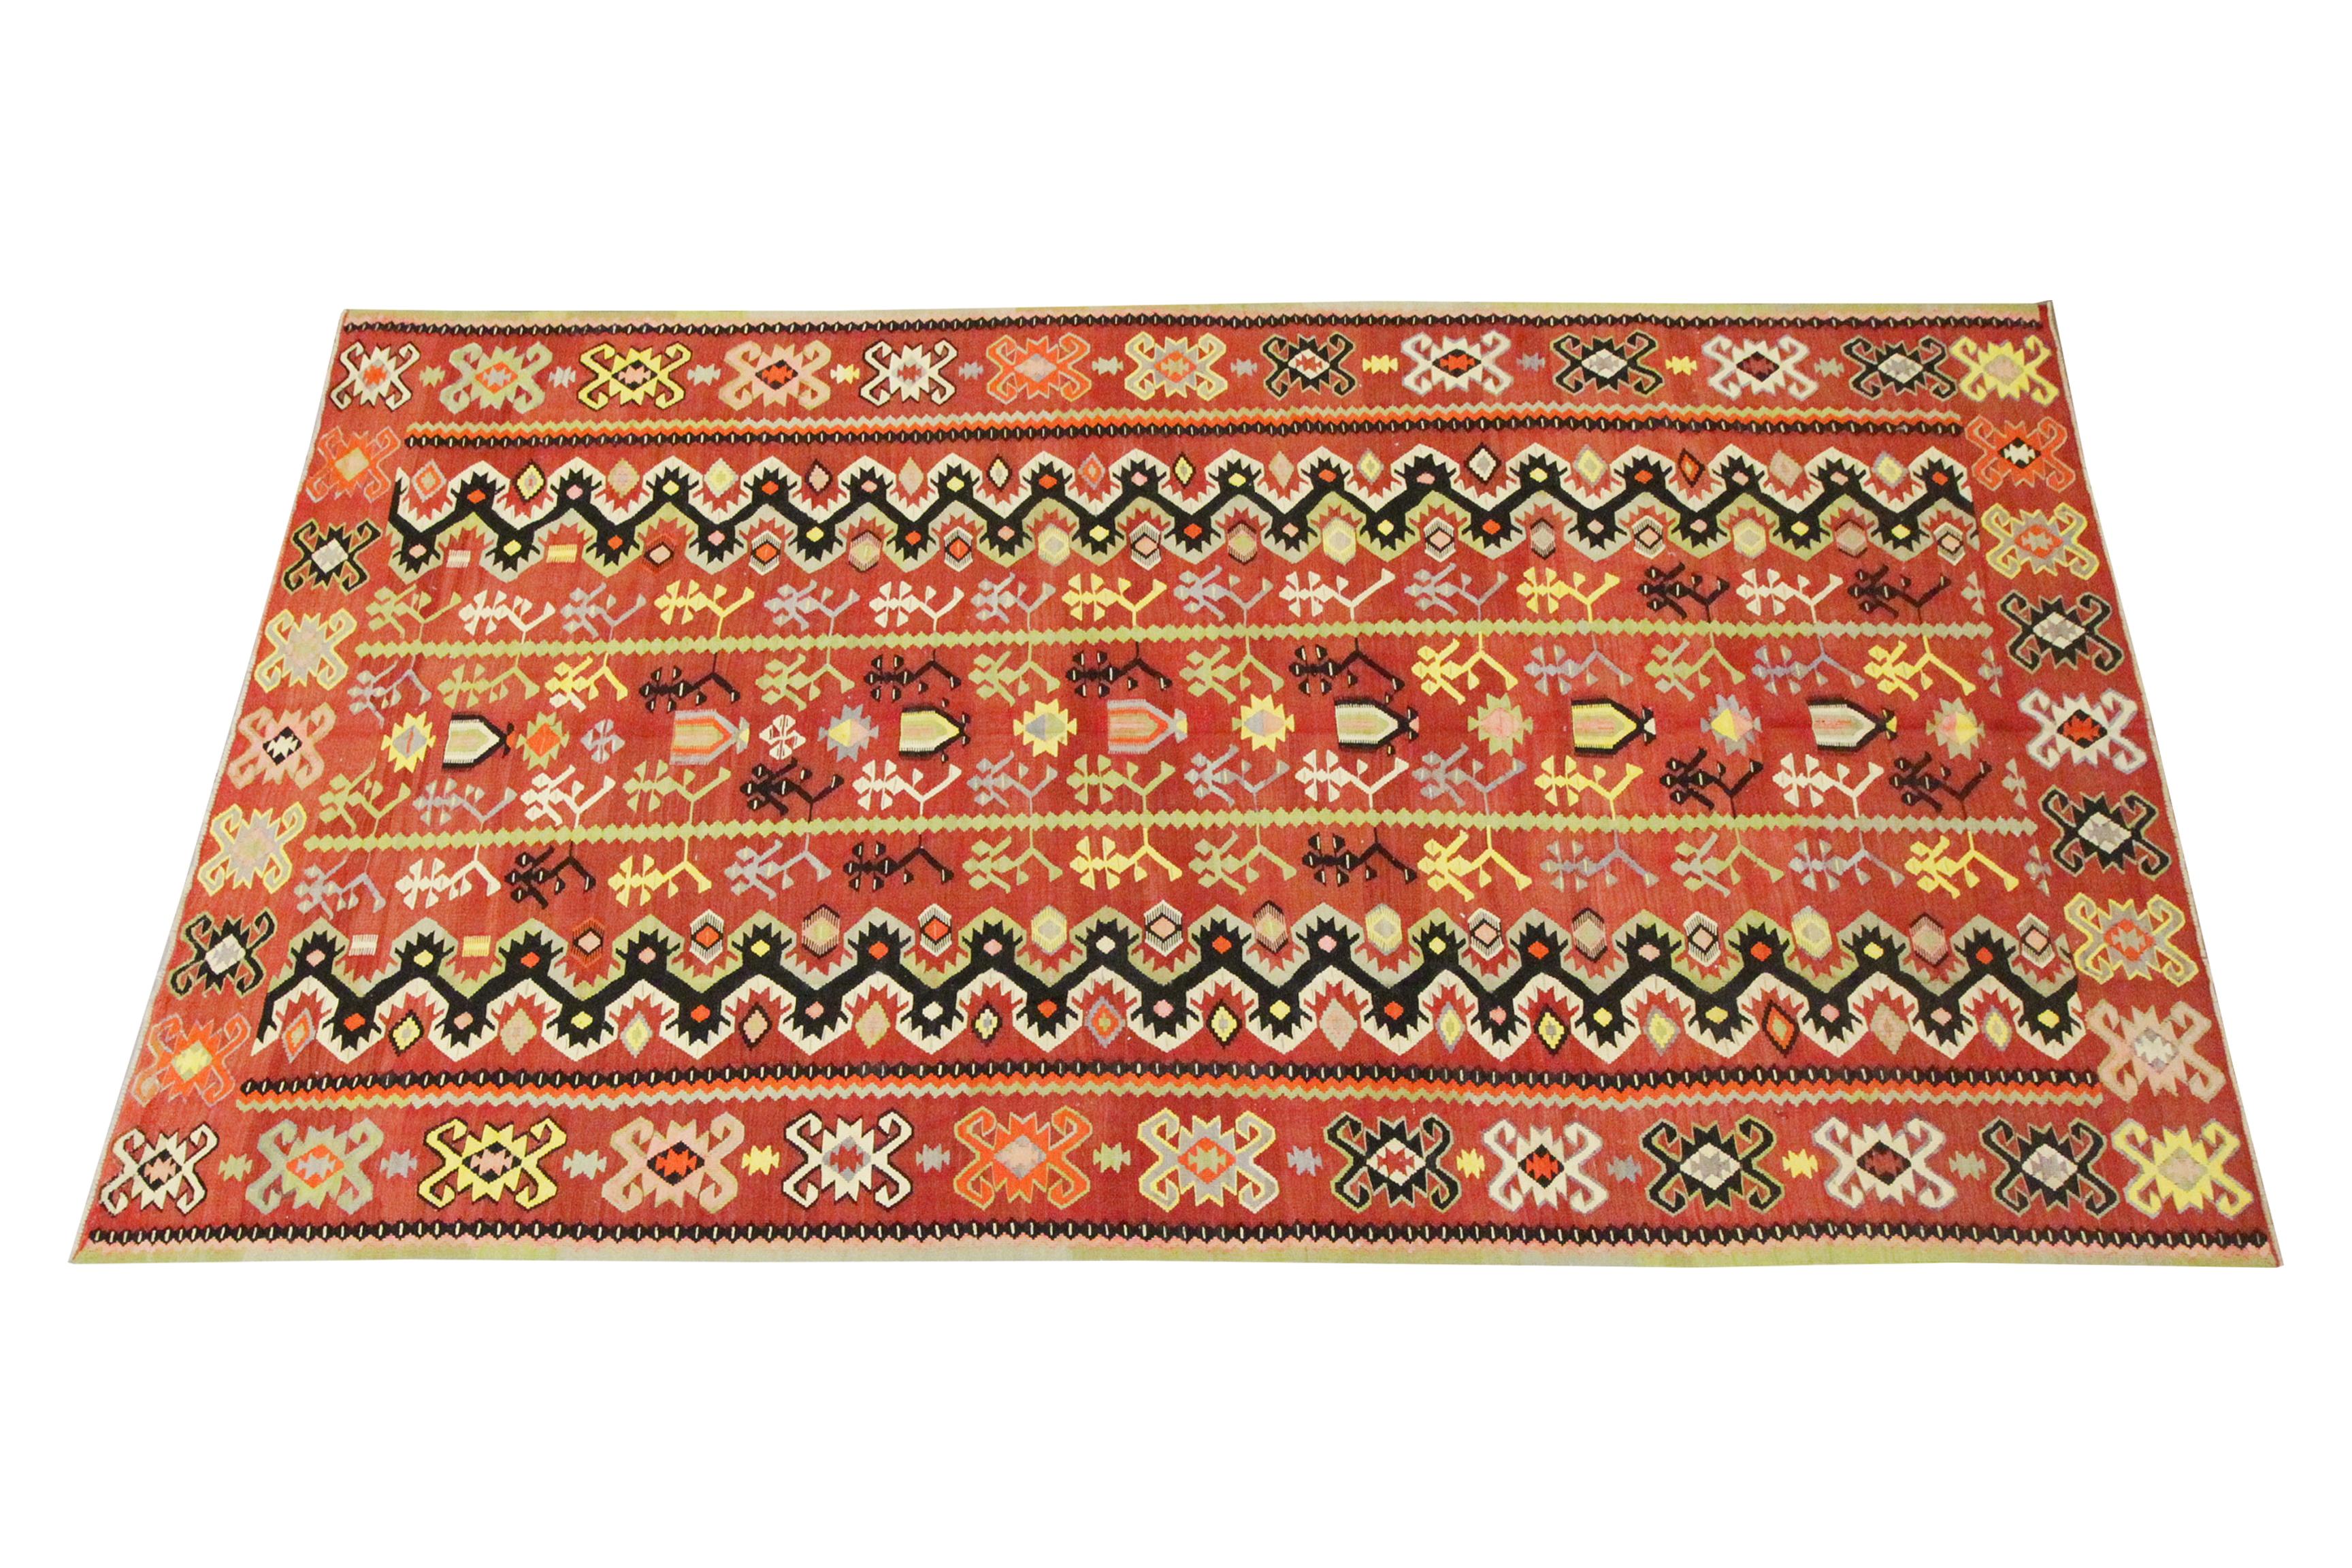 This antique tribal kilim is a bold accent rug woven with elegance and delicacy. This kilim has been woven with a rich red background with accents of black, yellow, green and light blue that make up the geometric tribal design in a symmetrical